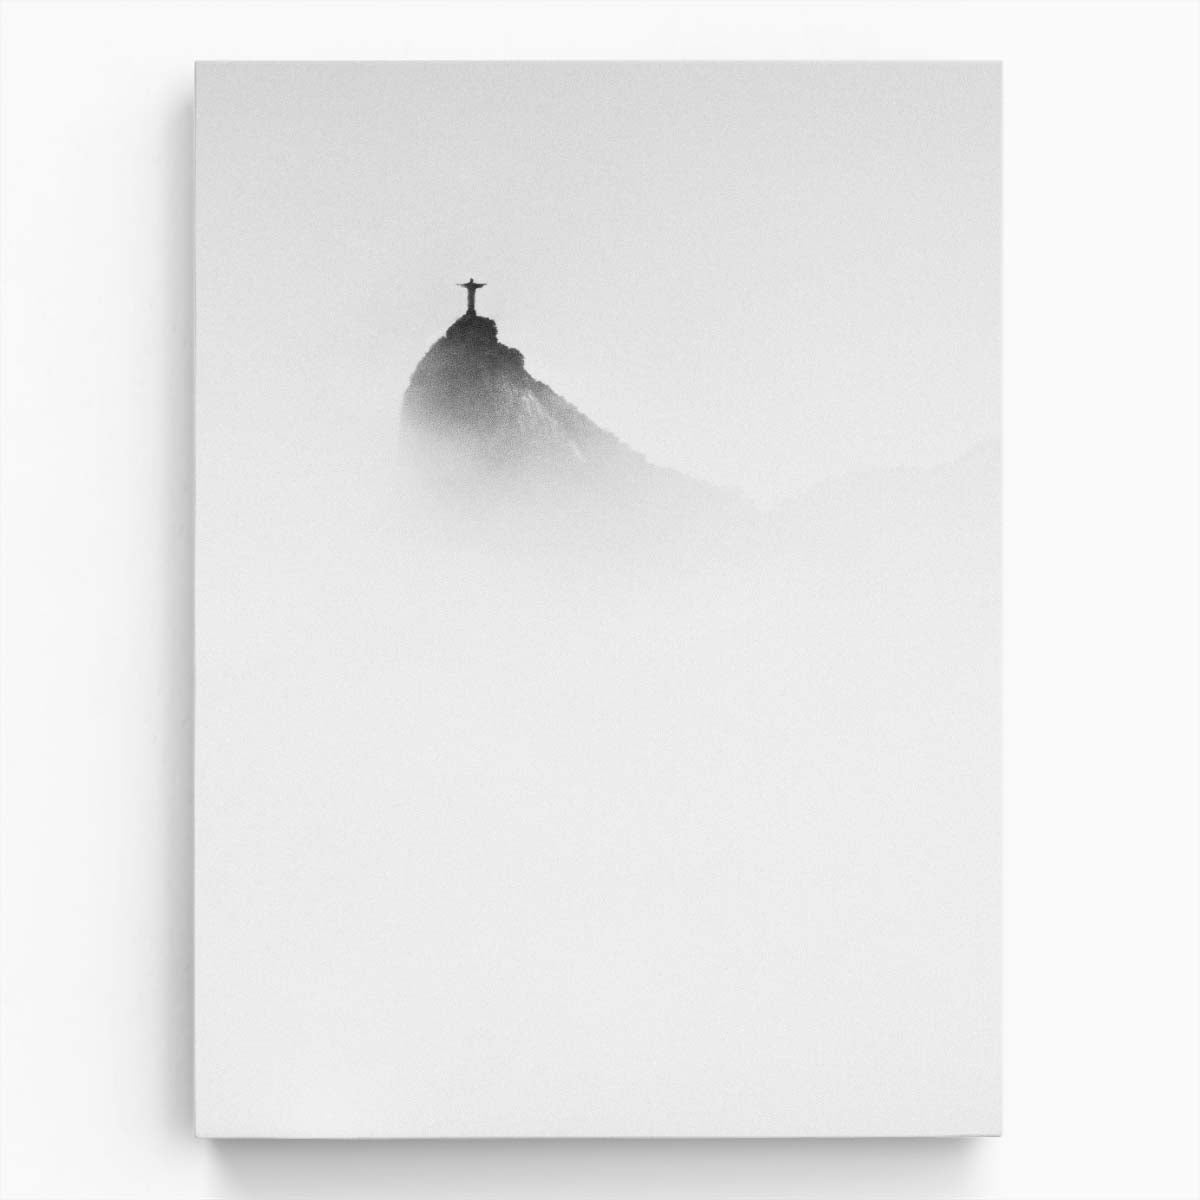 Monochrome Holy Christ Statue Landscape Photography, Rio De Janeiro by Luxuriance Designs, made in USA